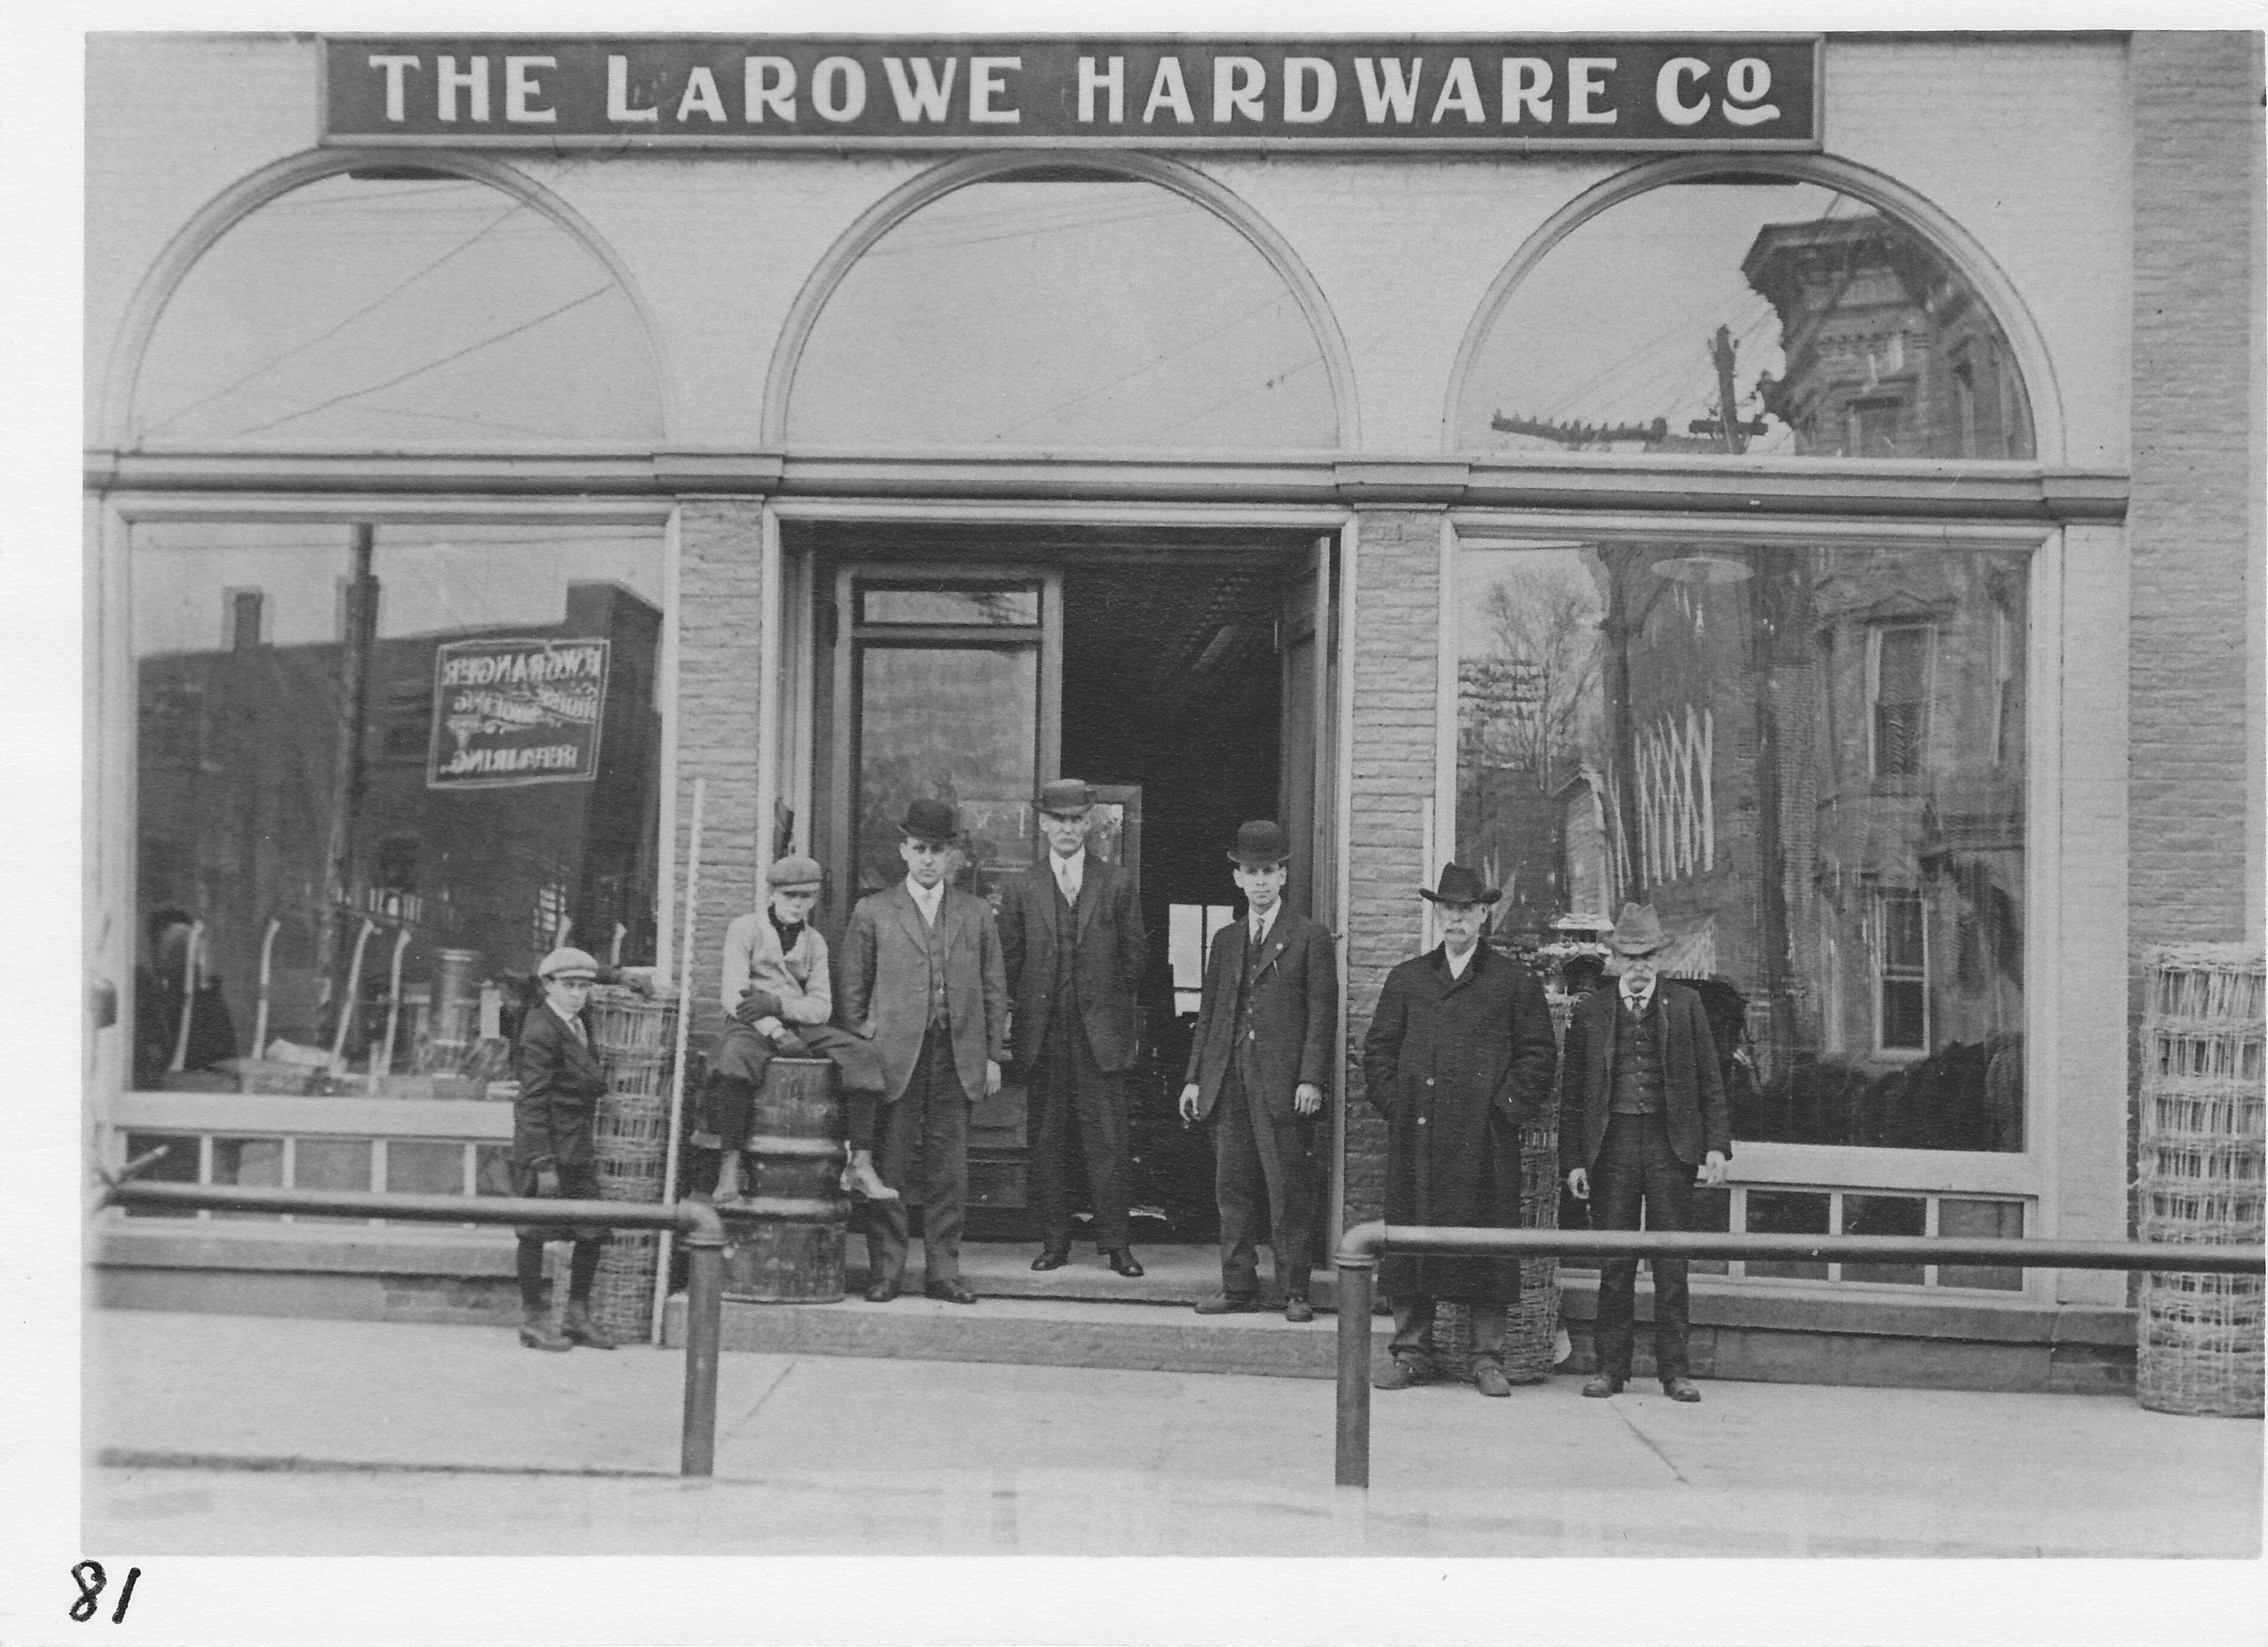 LaRowe Hardware Company, first location south side of Main Street where bank building now stands.